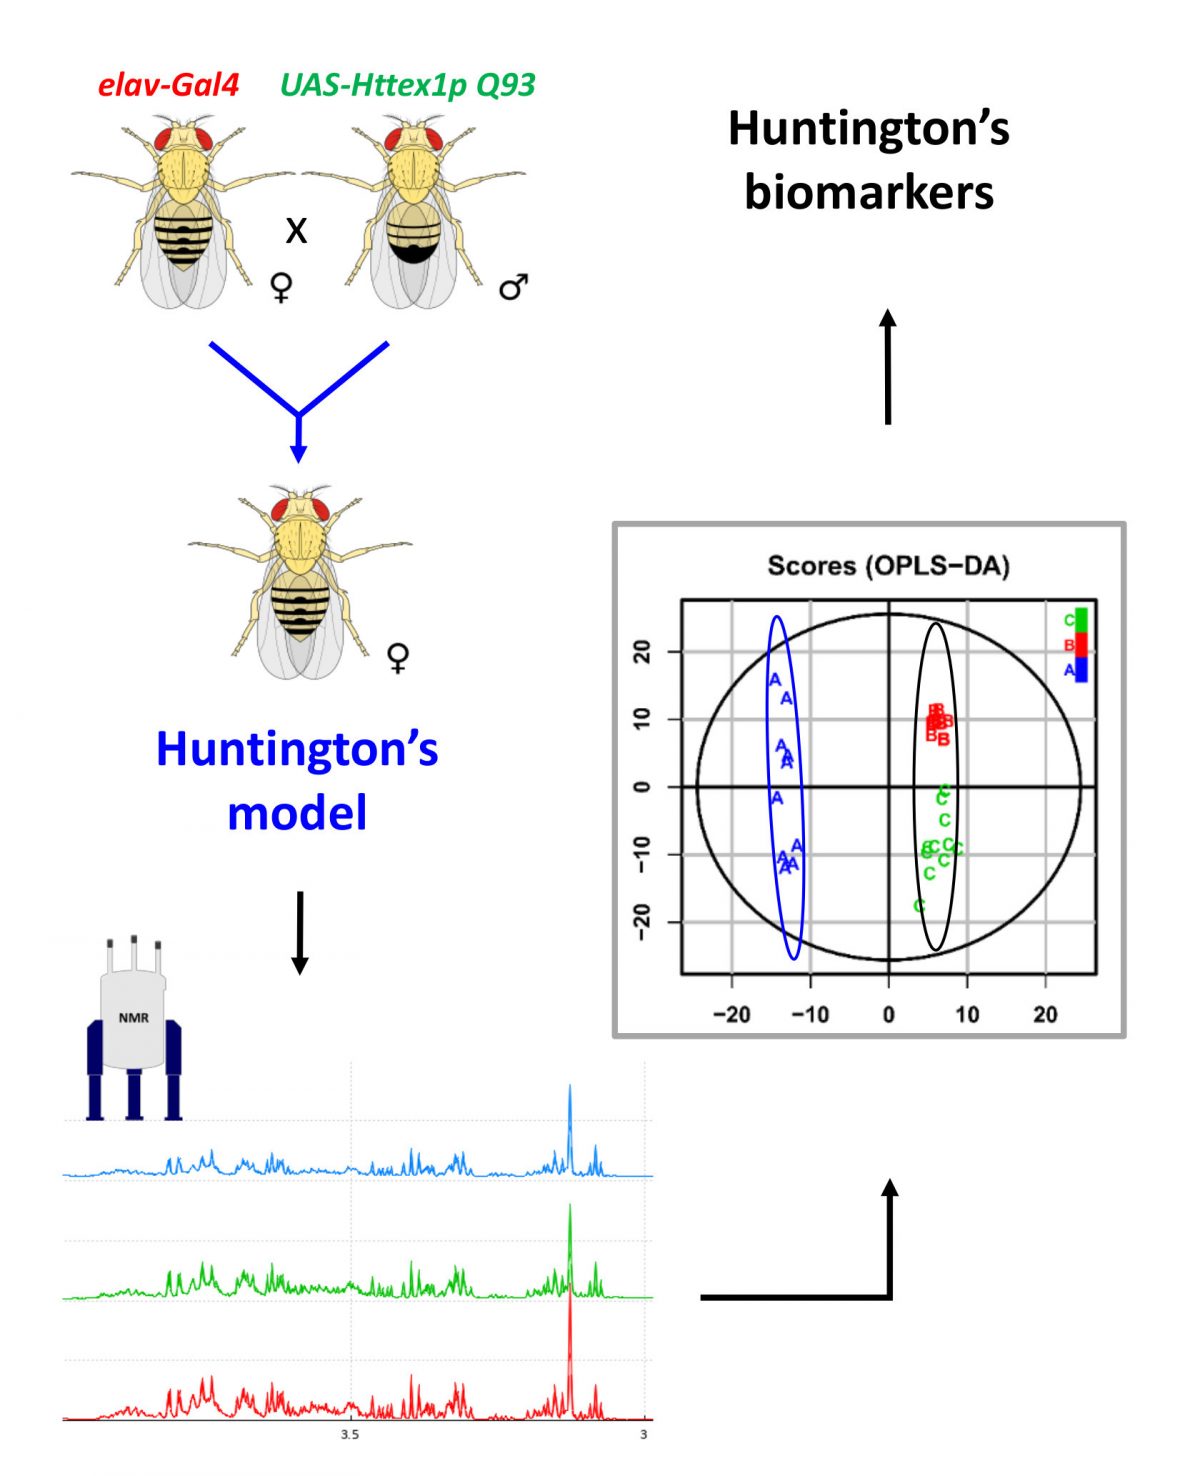 Metabolomic Nuclear Magnetic Resonance Studies at Presymptomatic and Symptomatic Stages of Huntington’s Disease on a Drosophila Model